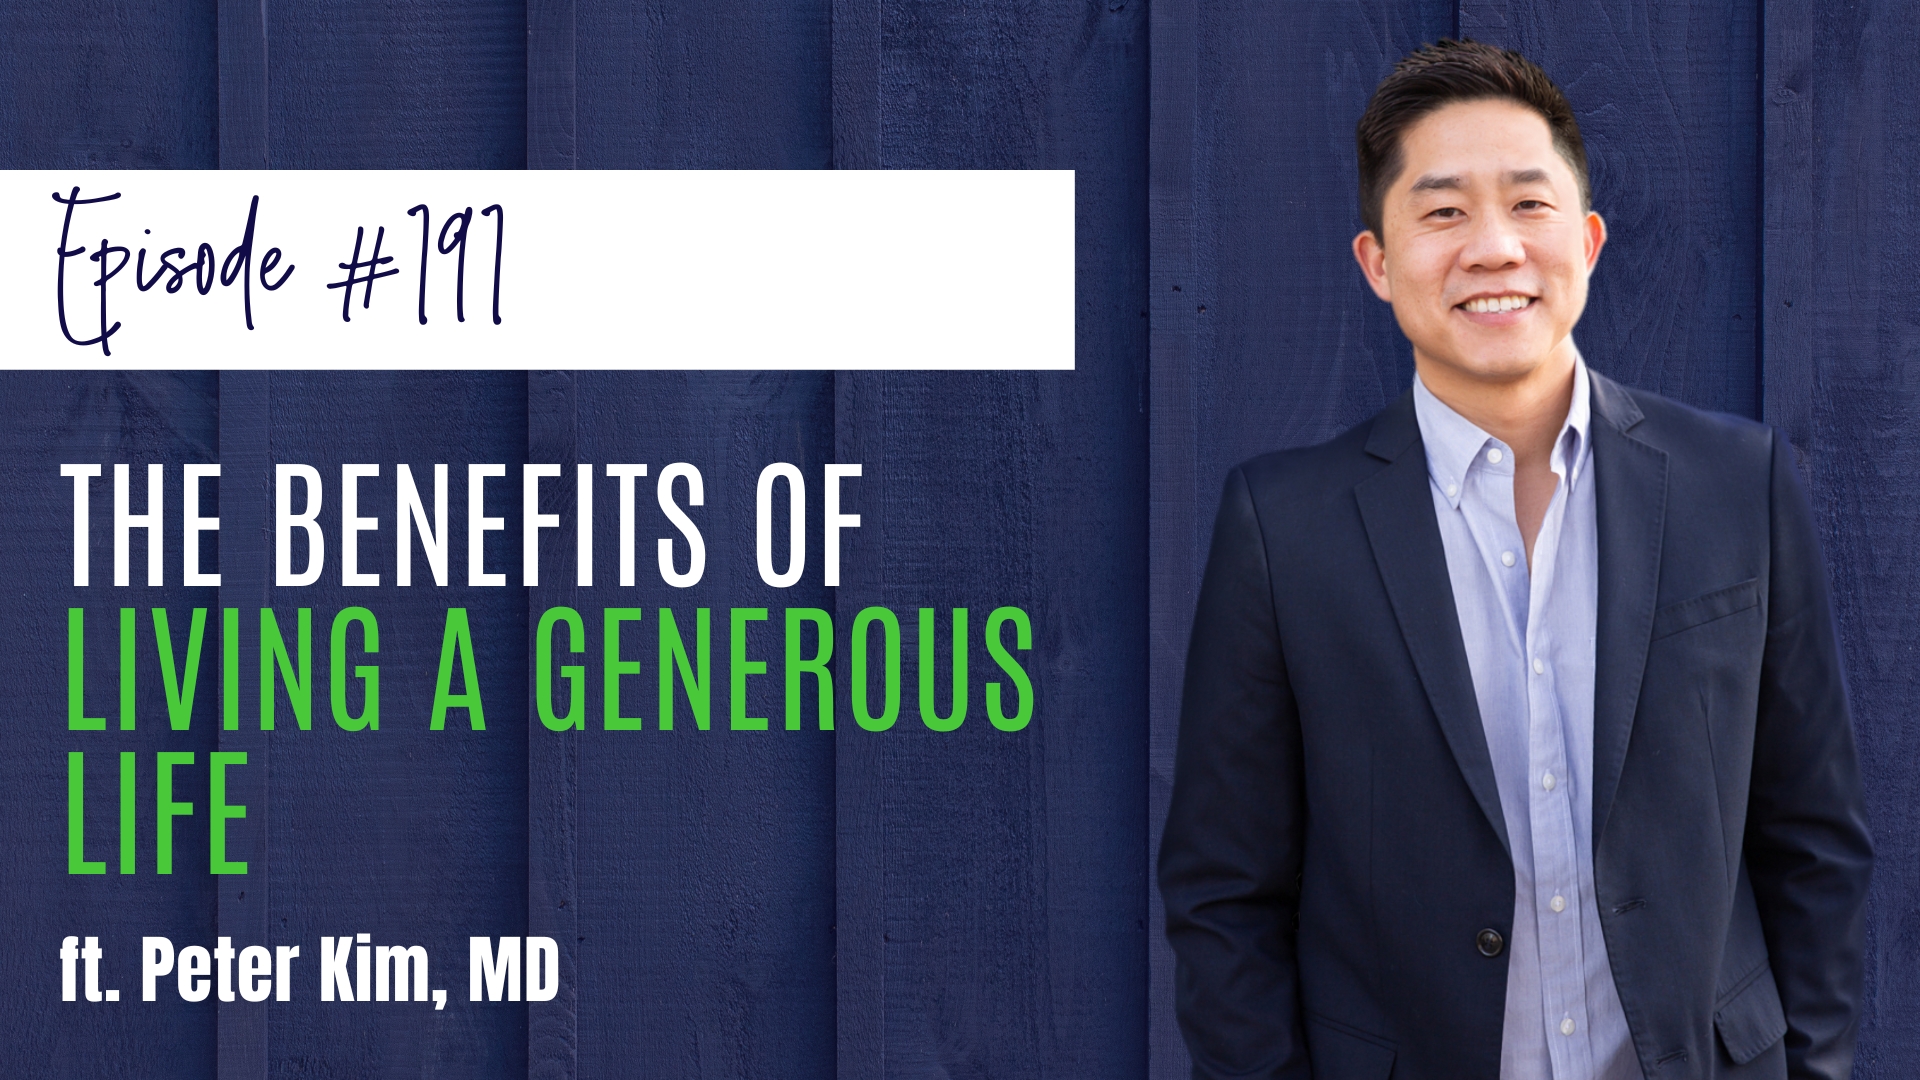 #191 The Benefits of Living a Generous Life ft. Peter Kim, M.D